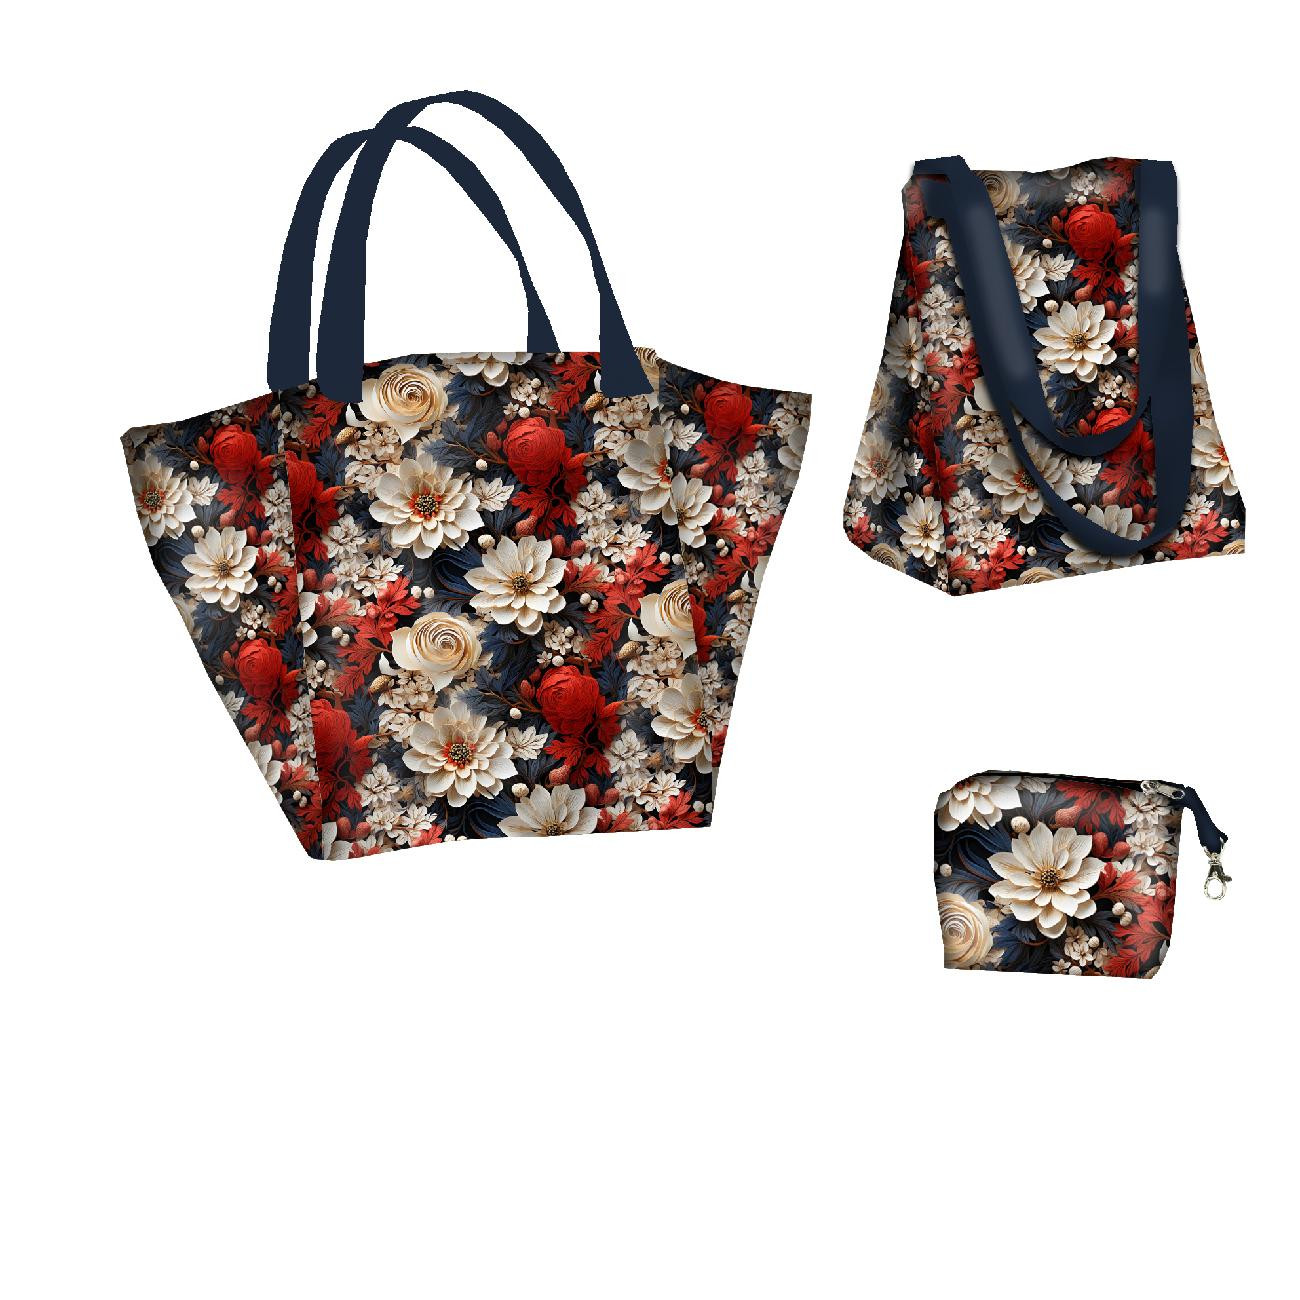 XL bag with in-bag pouch 2 in 1 - VIBRANT FLOWERS - sewing set